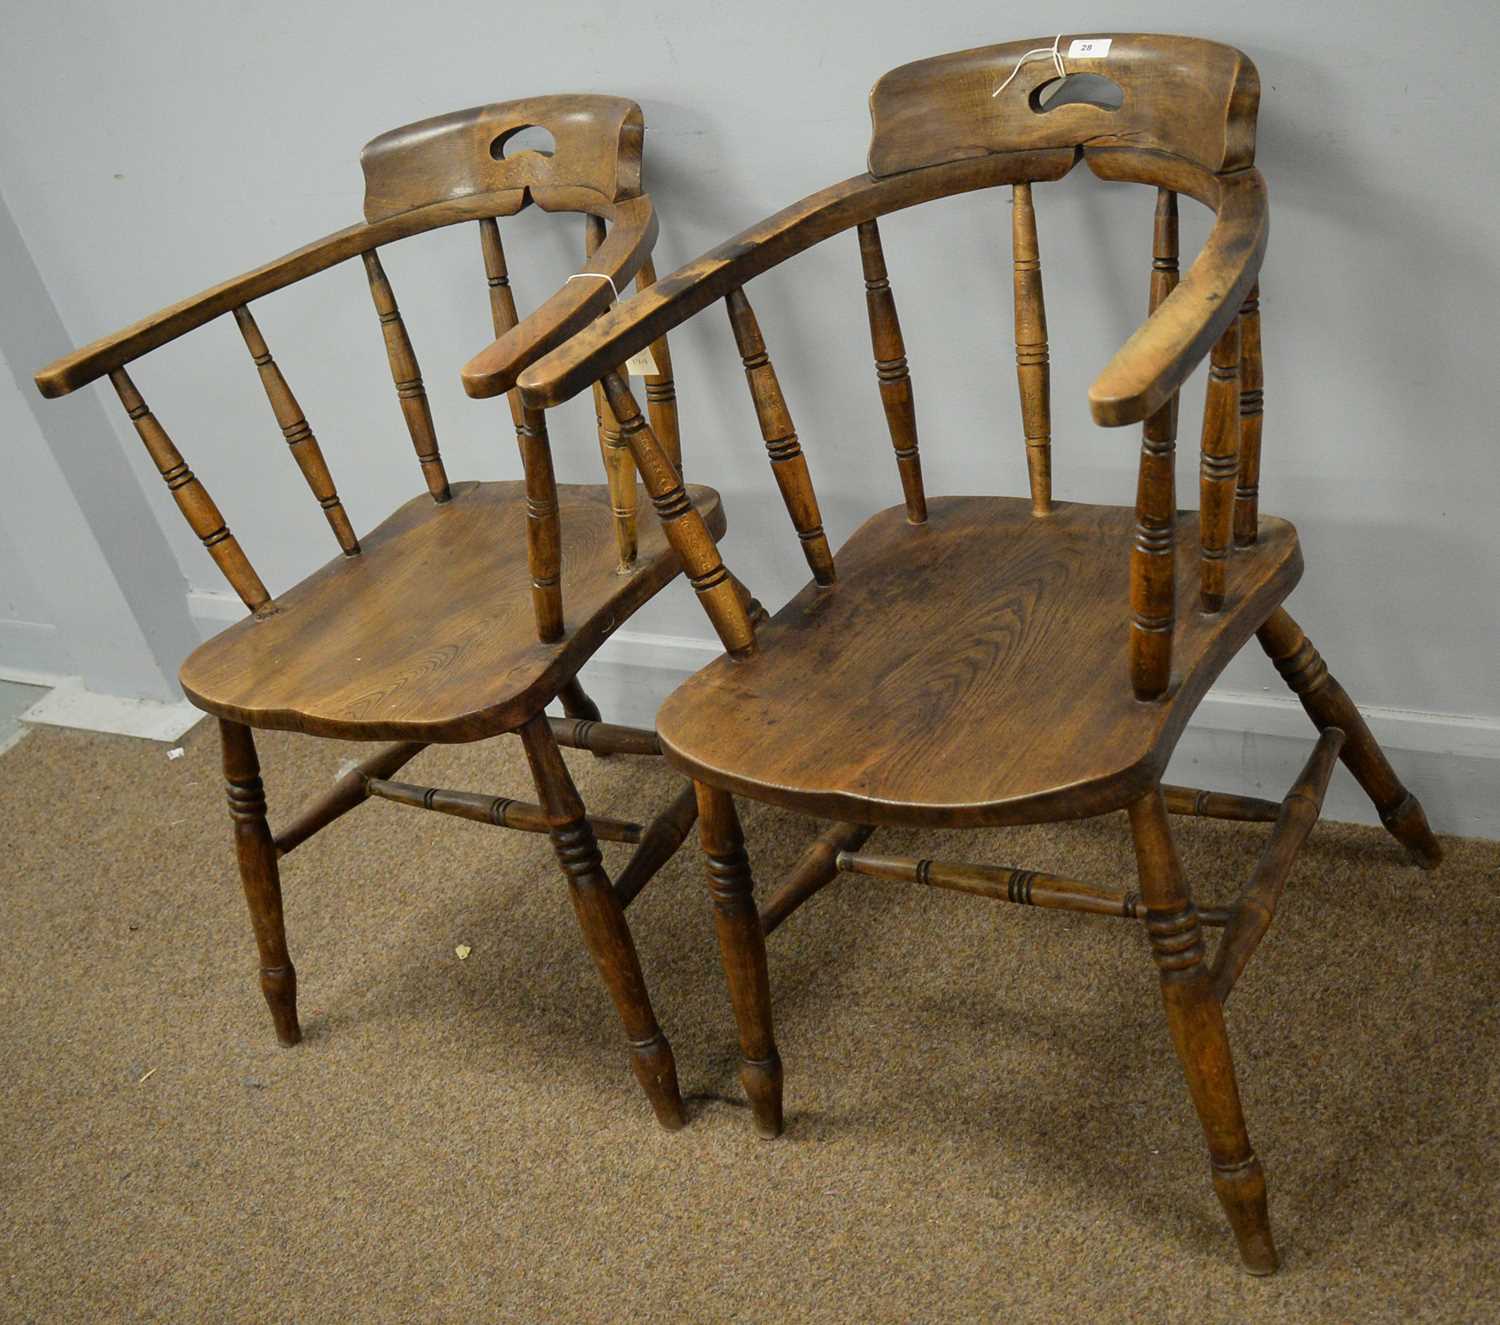 Two captain's chairs